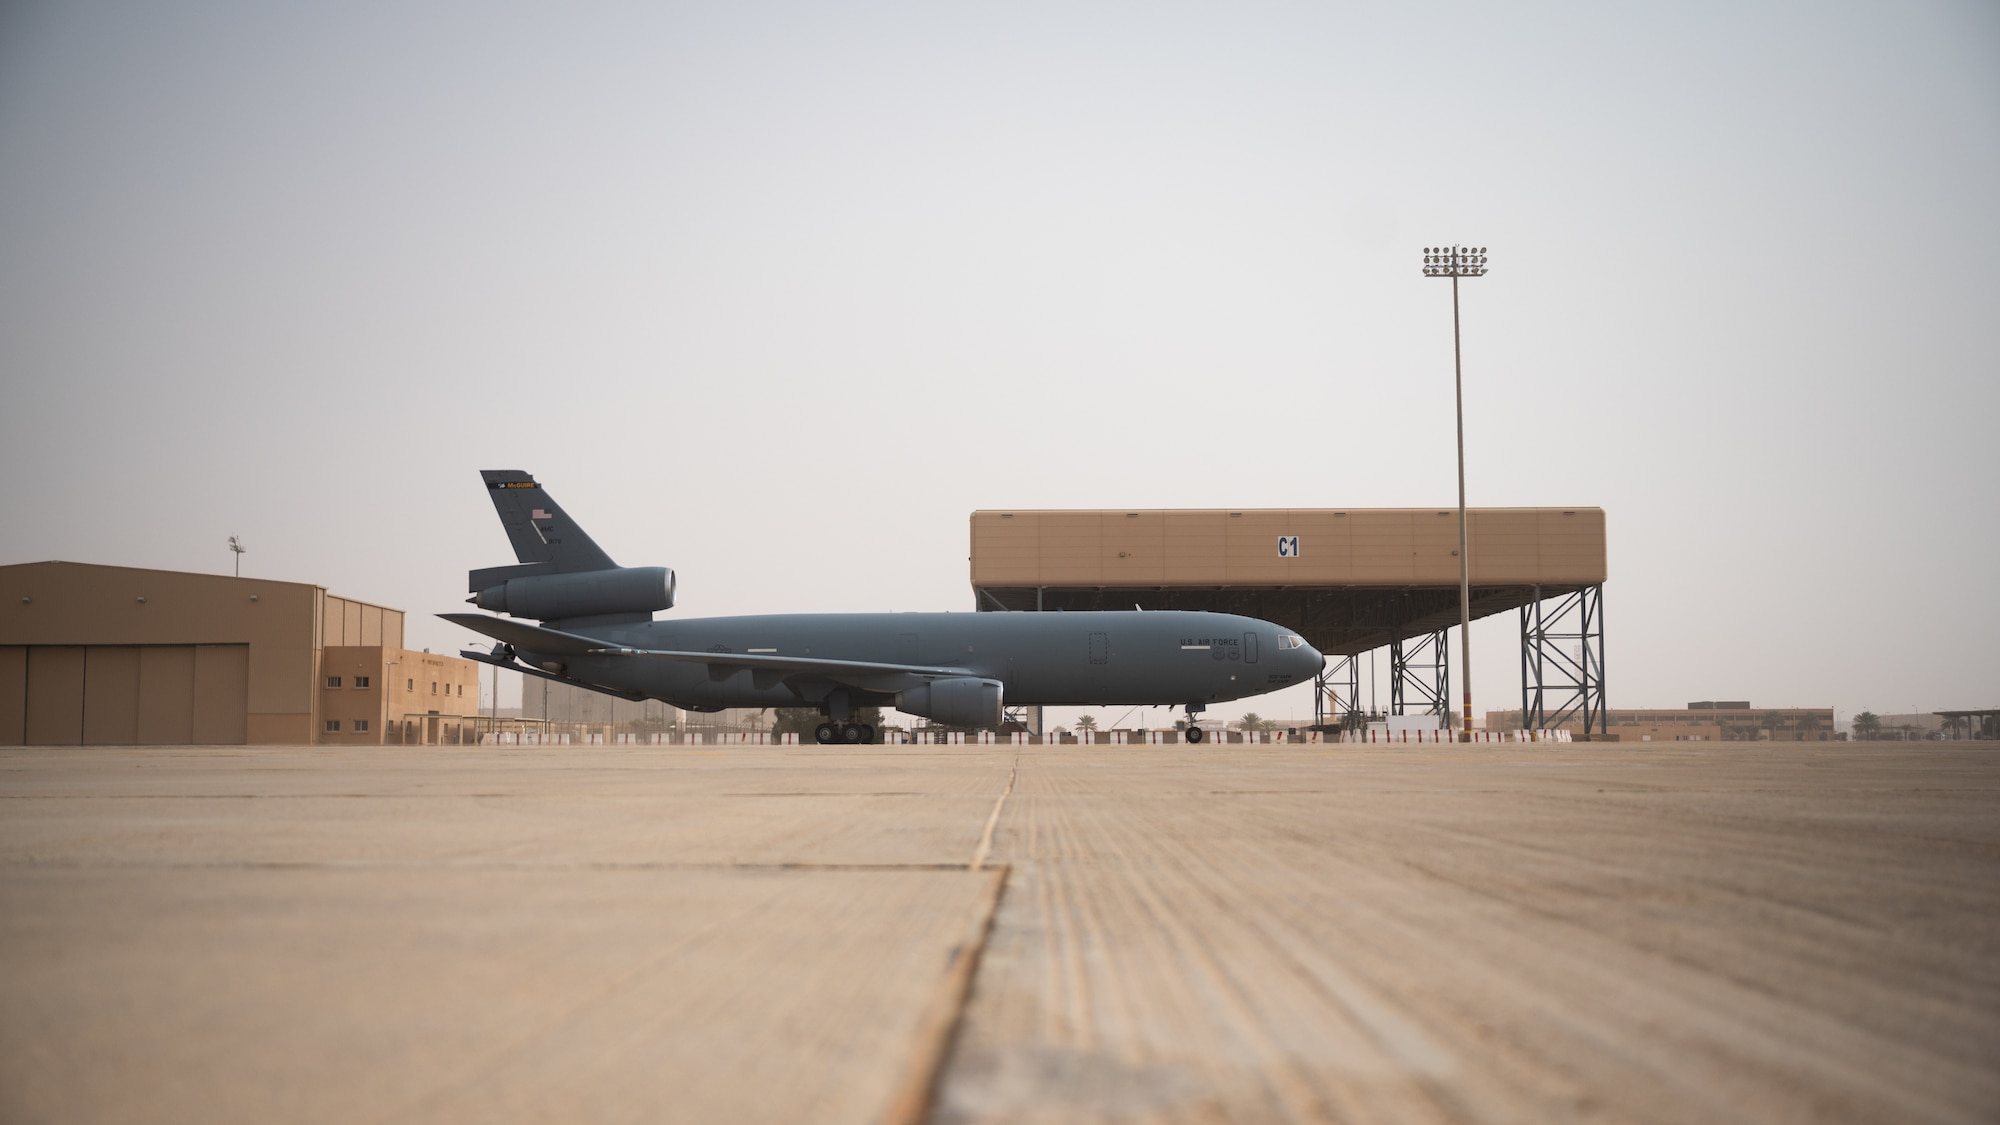 A U.S. Air Force KC-10 Extender assigned to the 908th Expeditionary Air Refueling Squadron taxis at Prince Sultan Air Base, Kingdom of Saudi Arabia, March 6, 2022. Airmen of the 908th EARS provide advanced tanker and cargo capabilities and can refuel U.S., ally and partner nation military aircraft. (U.S. Air Force photo by Senior Airman Jacob B. Wrightsman)